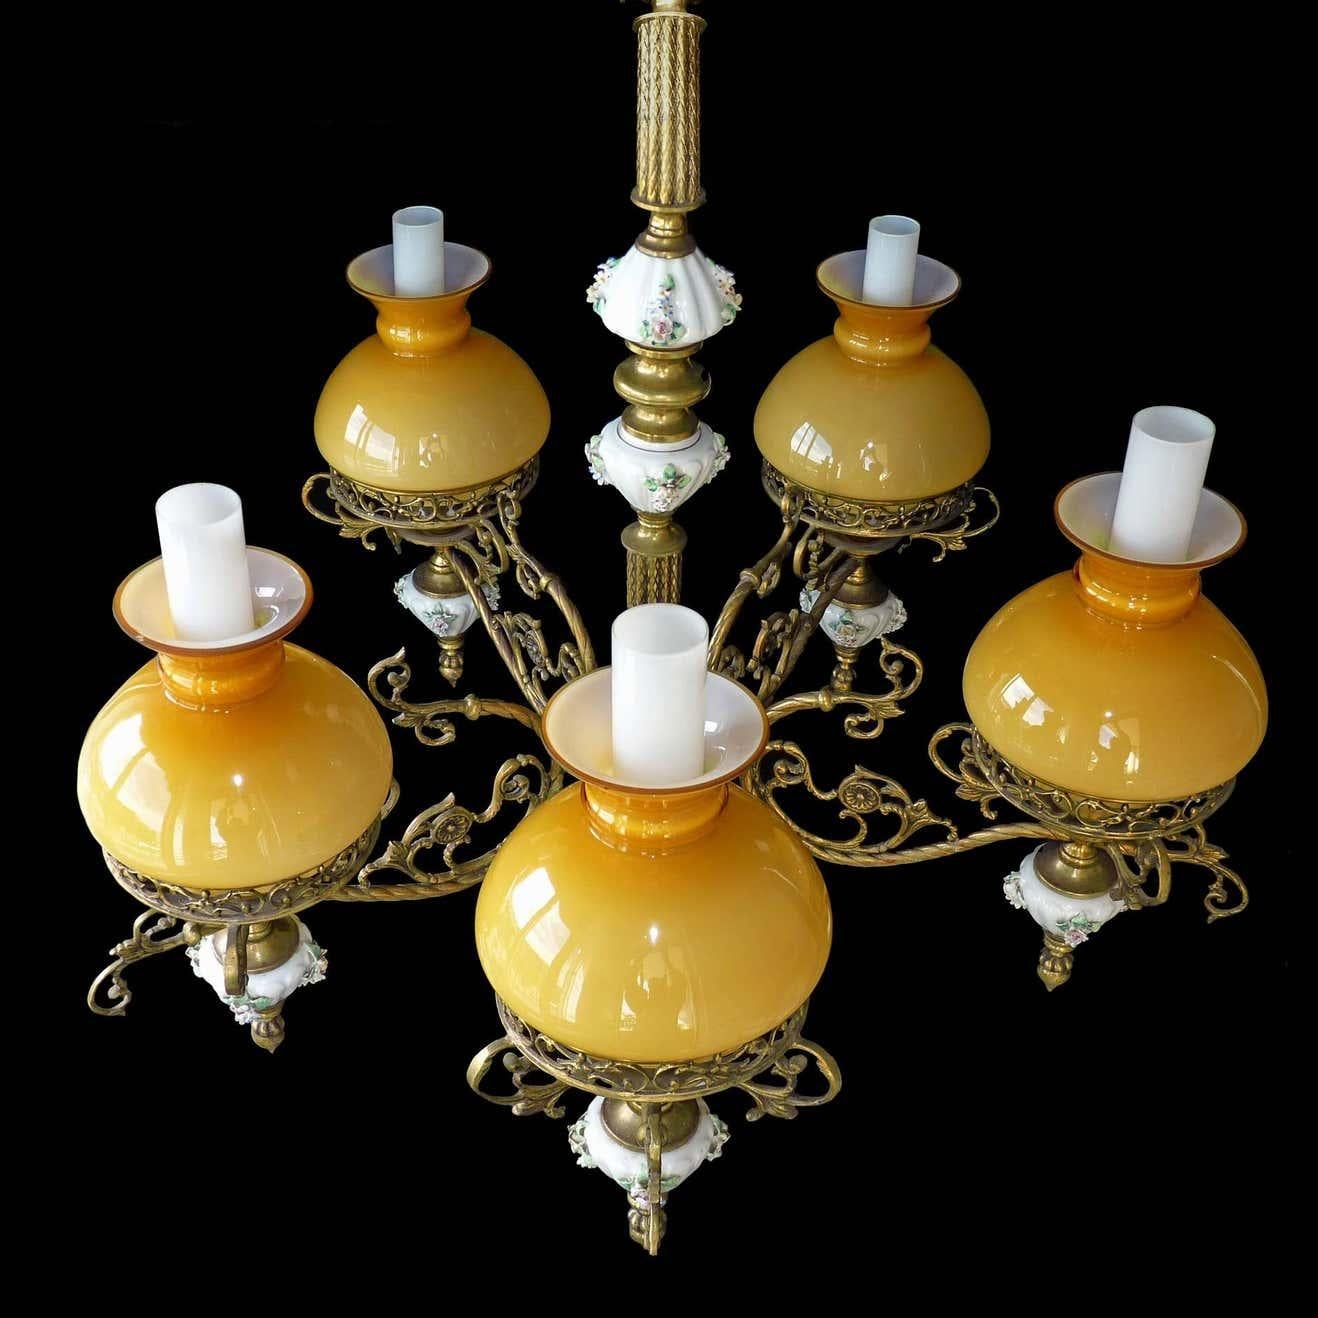 20th Century Victorian Chandelier with Porcelain Flowers, Gilt Bronze & Amber Glass Globes